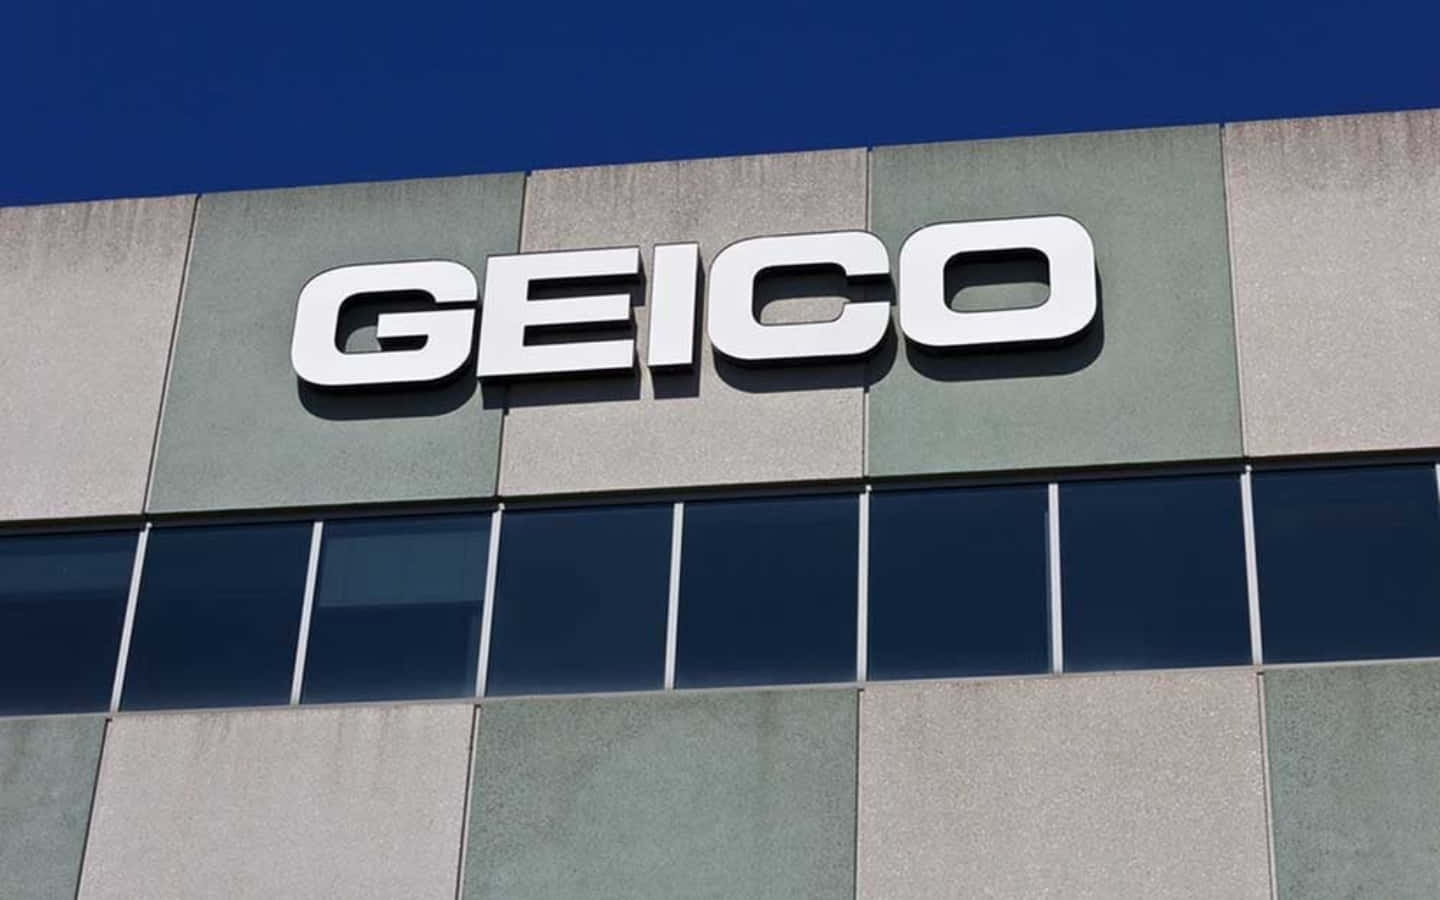 The Iconic Geico Gecko in a Friendly Pose